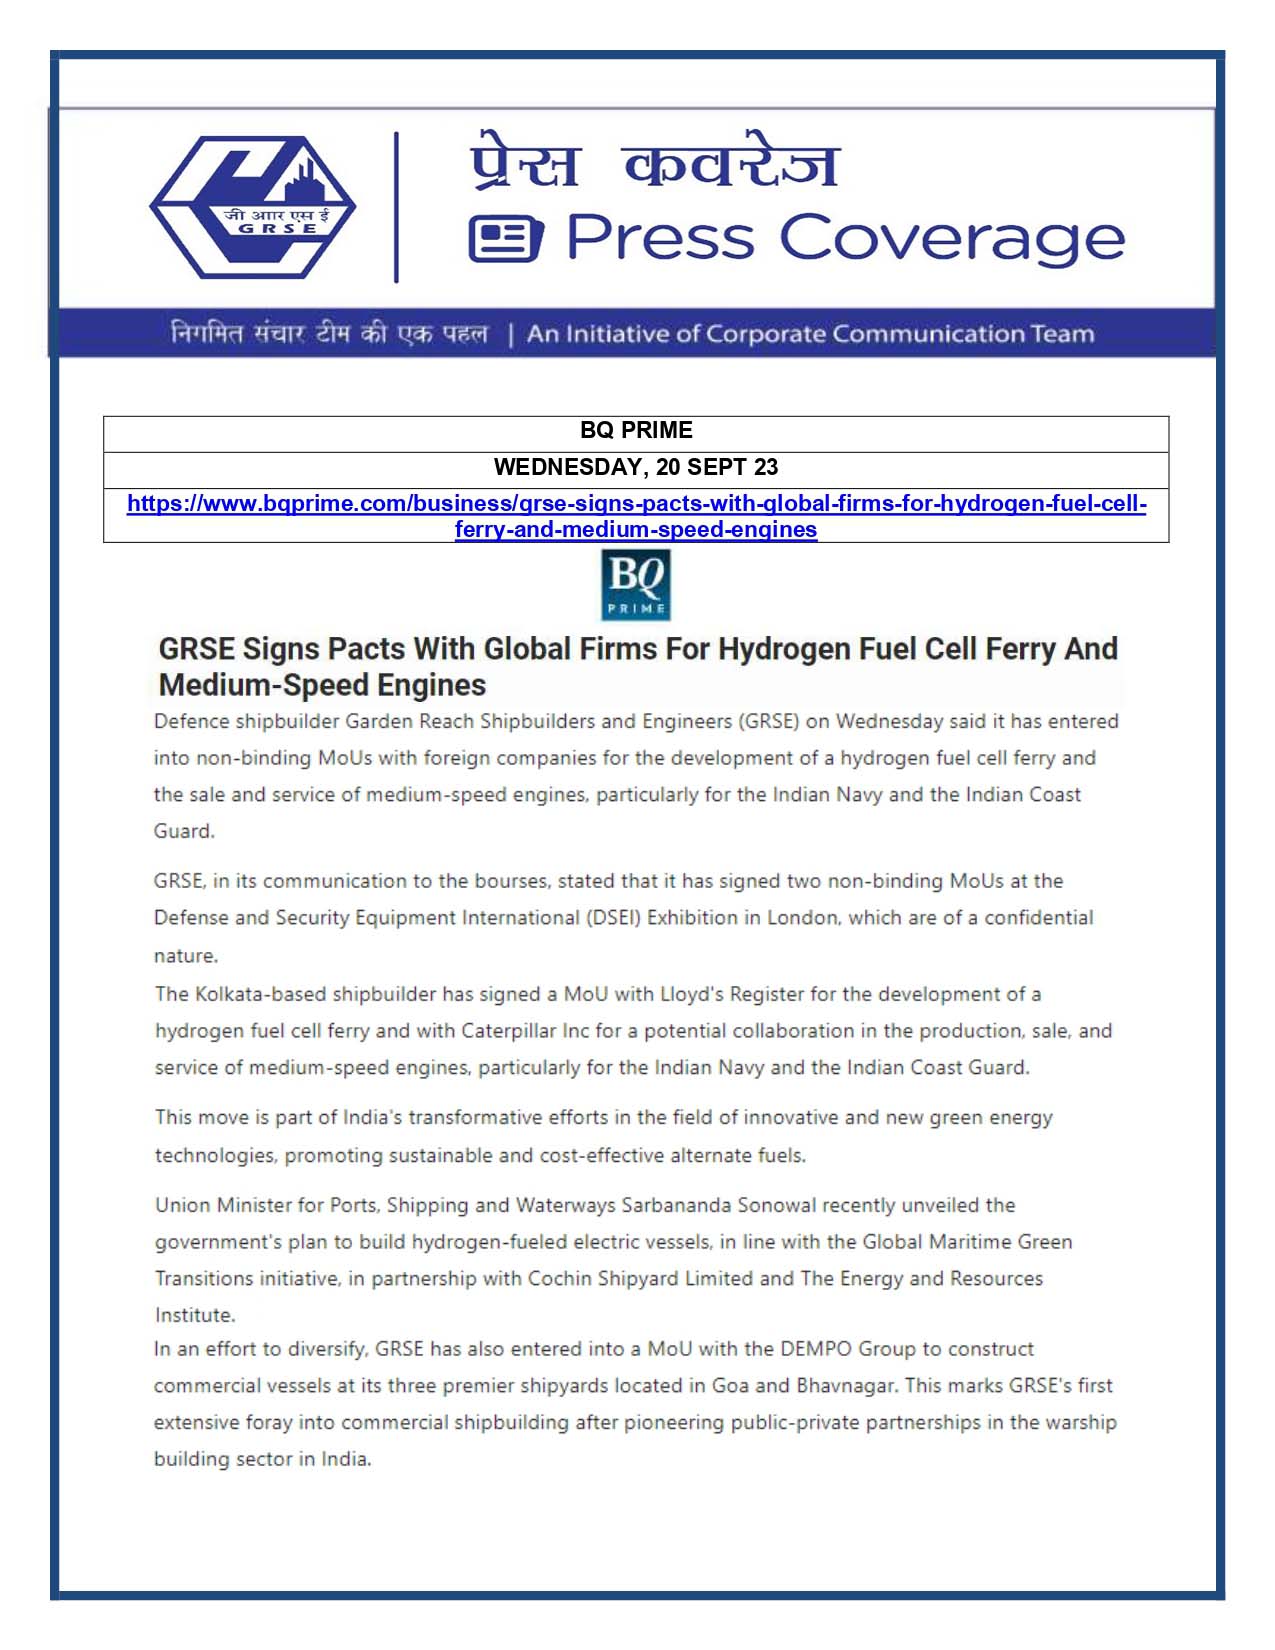 Press Coverage : BQ Prime, 20 Sep 23 : GRSE signs pact with Global firms for Hydrogen Fuel Cell Ferry and Medium-Speed Engines